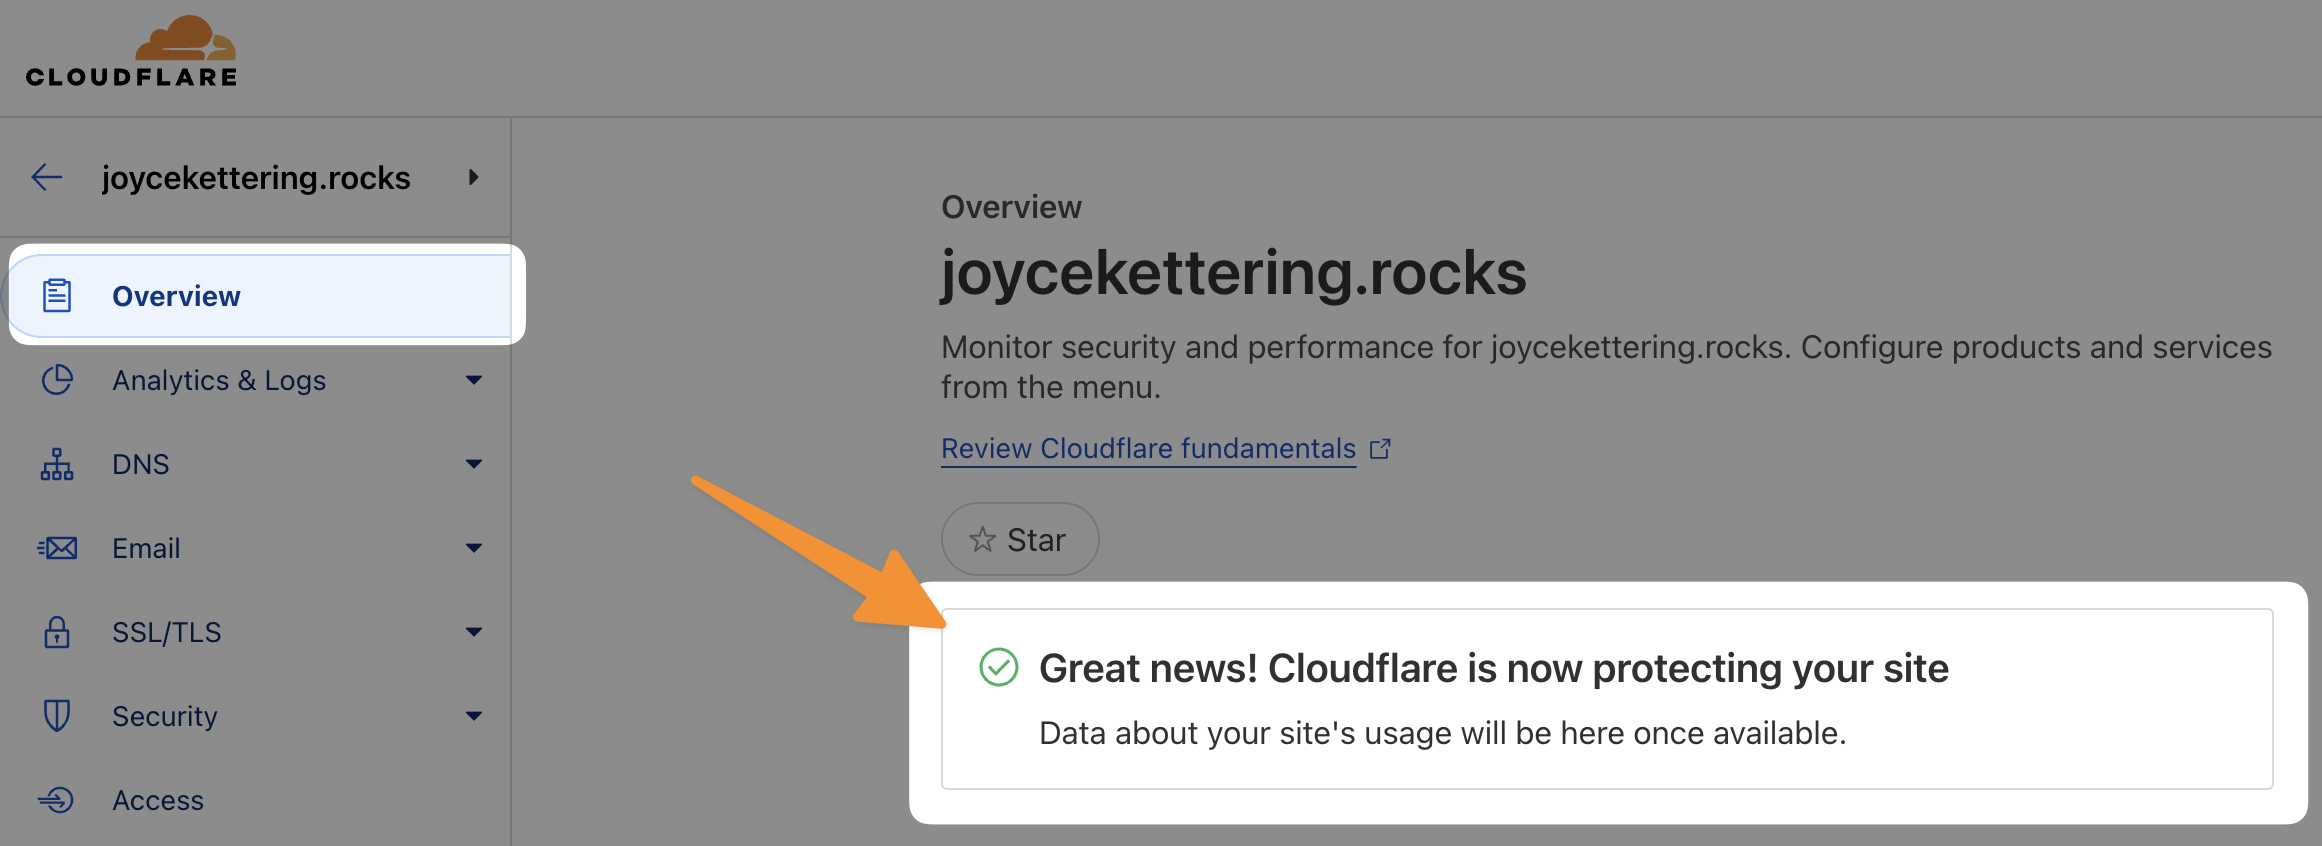 Cloudflare nameservers updated